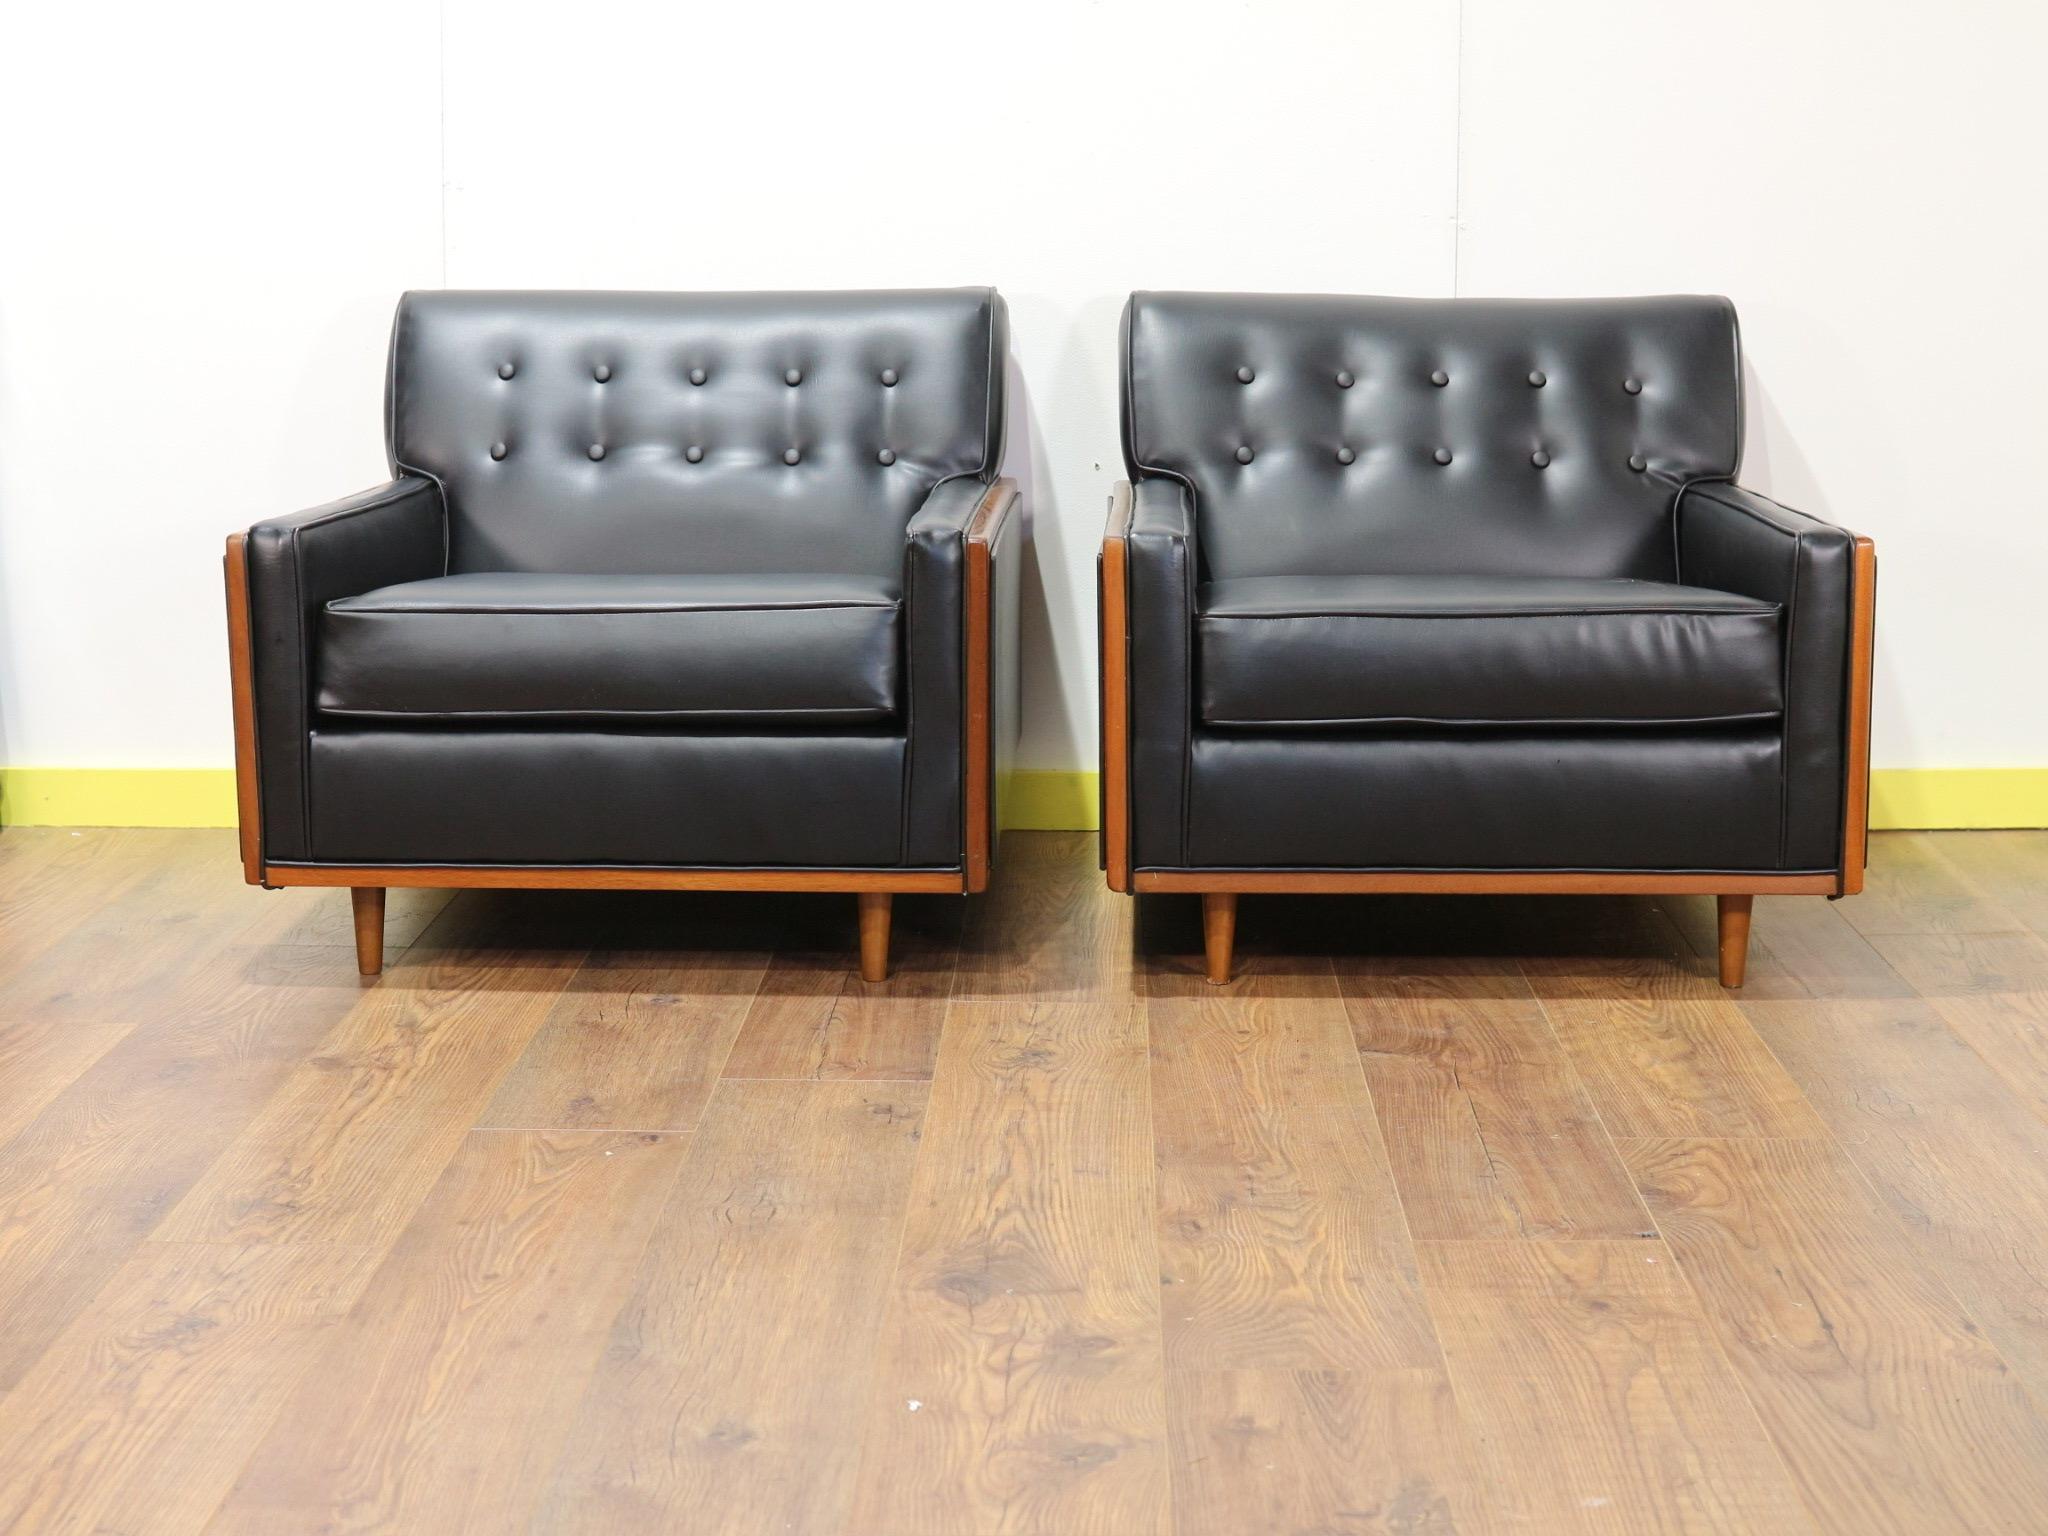 A gorgeous pair of lounge chairs made by G Plan for their American range. These fabulous chairs are a style icon that look as good now as they did in the 1960s when first released.

 

Dimensions

Cms w78 d81.5 h68 Seat height 39 Seat depth 56